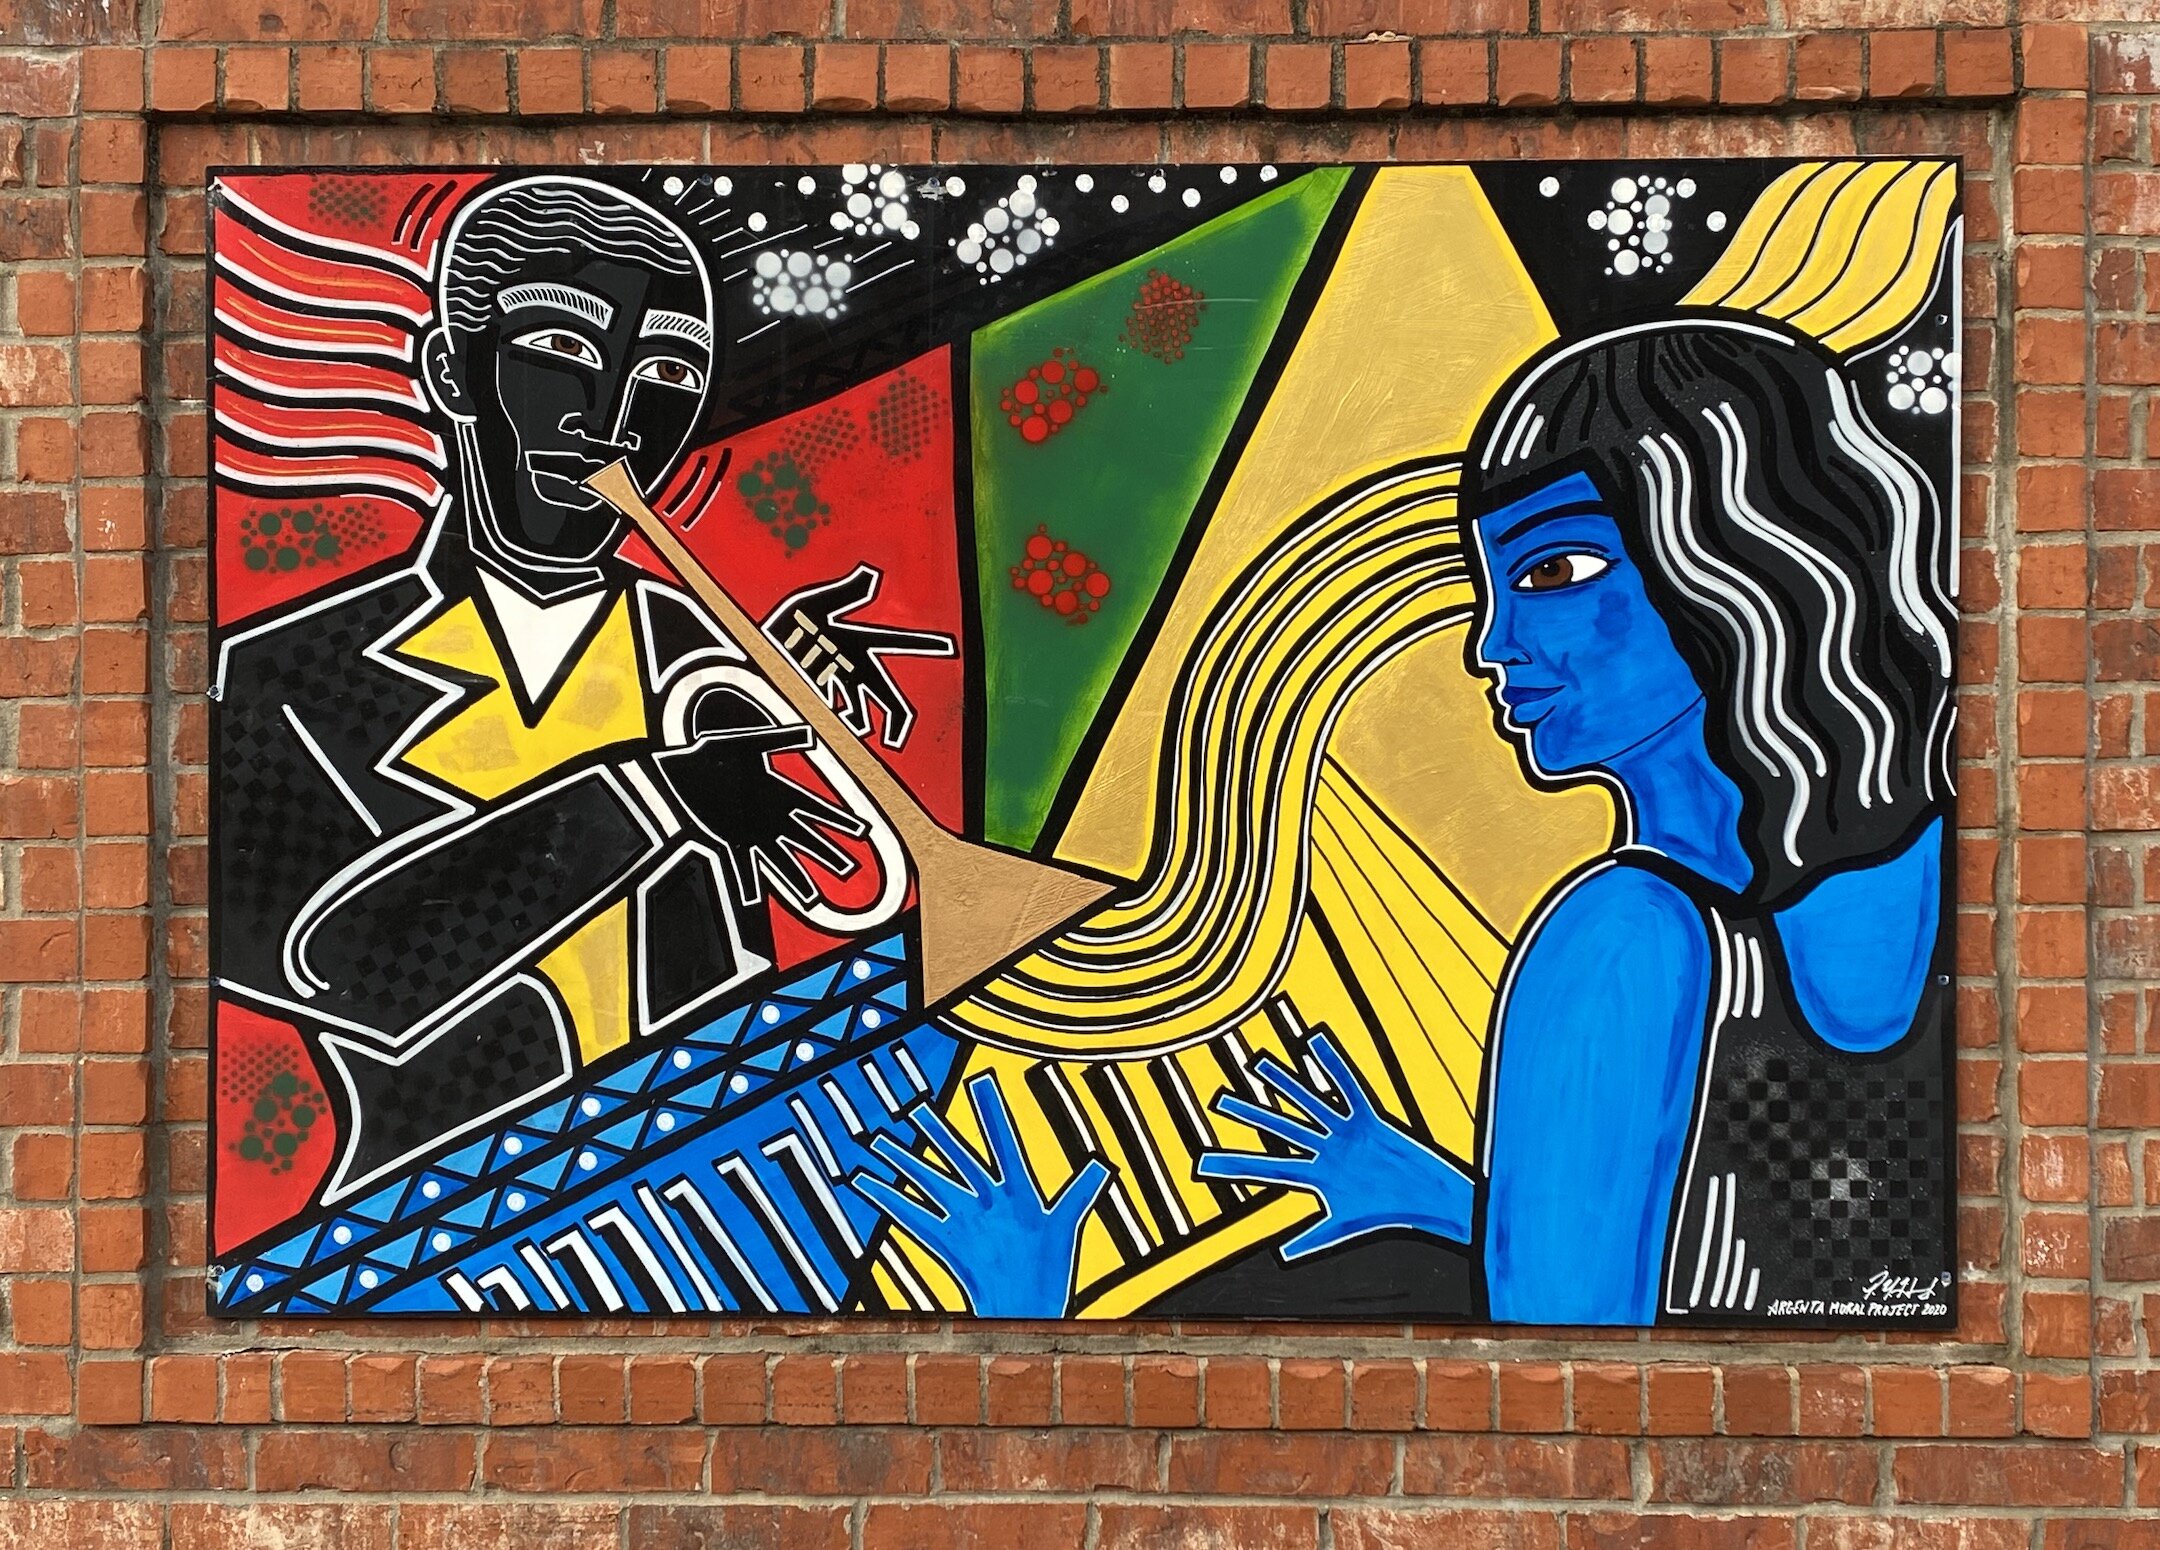    All That Jazz  , 5th St. off Main in North Little Rock, mural by Perrion Hurd 